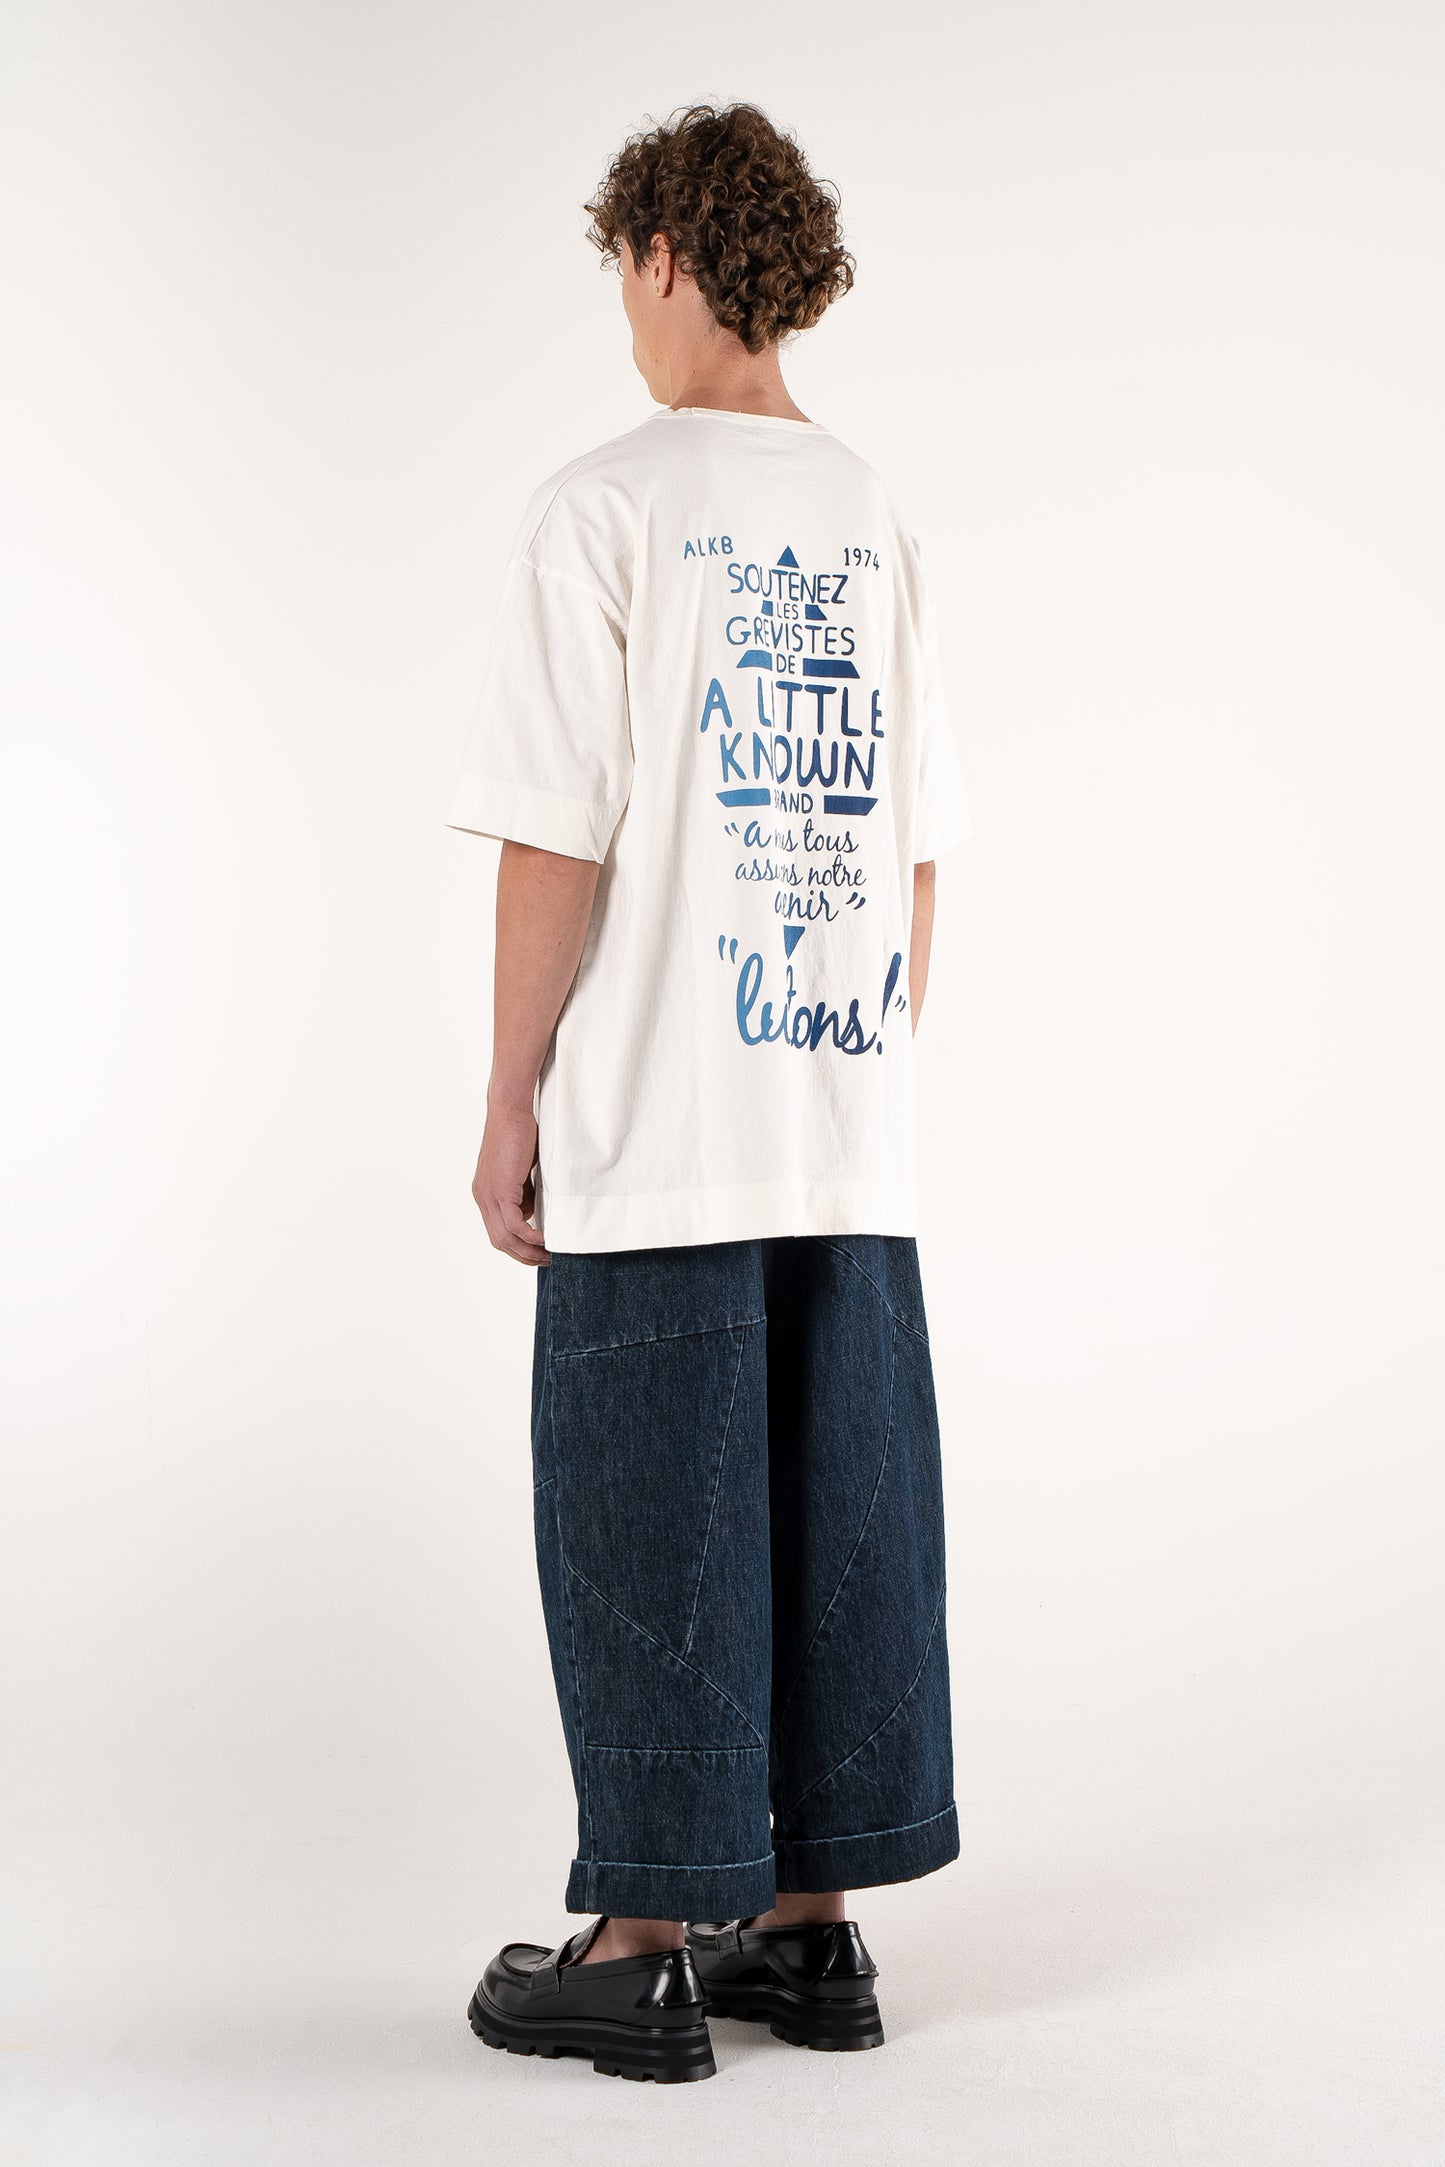 Oversized Handprinted T-shirt – White "Luttons"